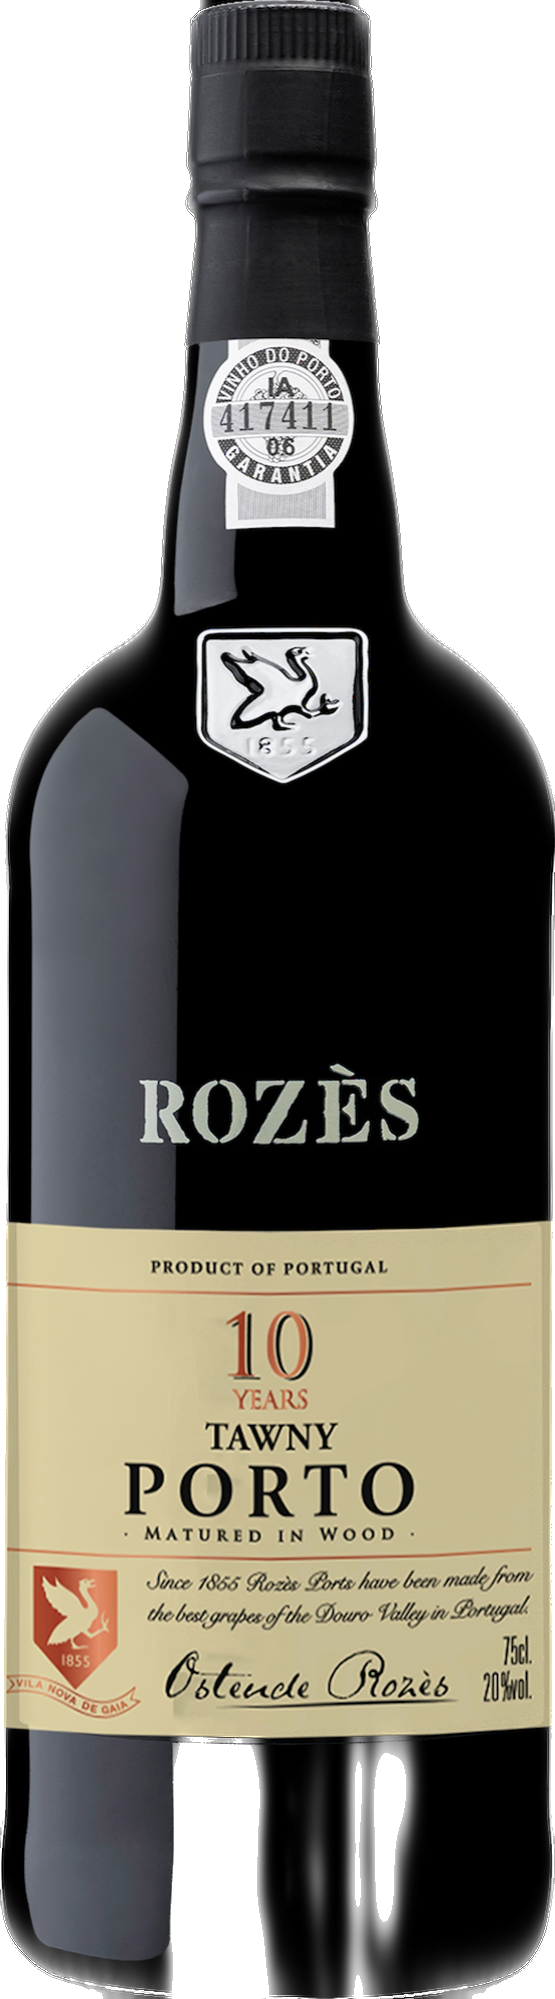 Rozés 10 years Old Tawny Portugal Douro